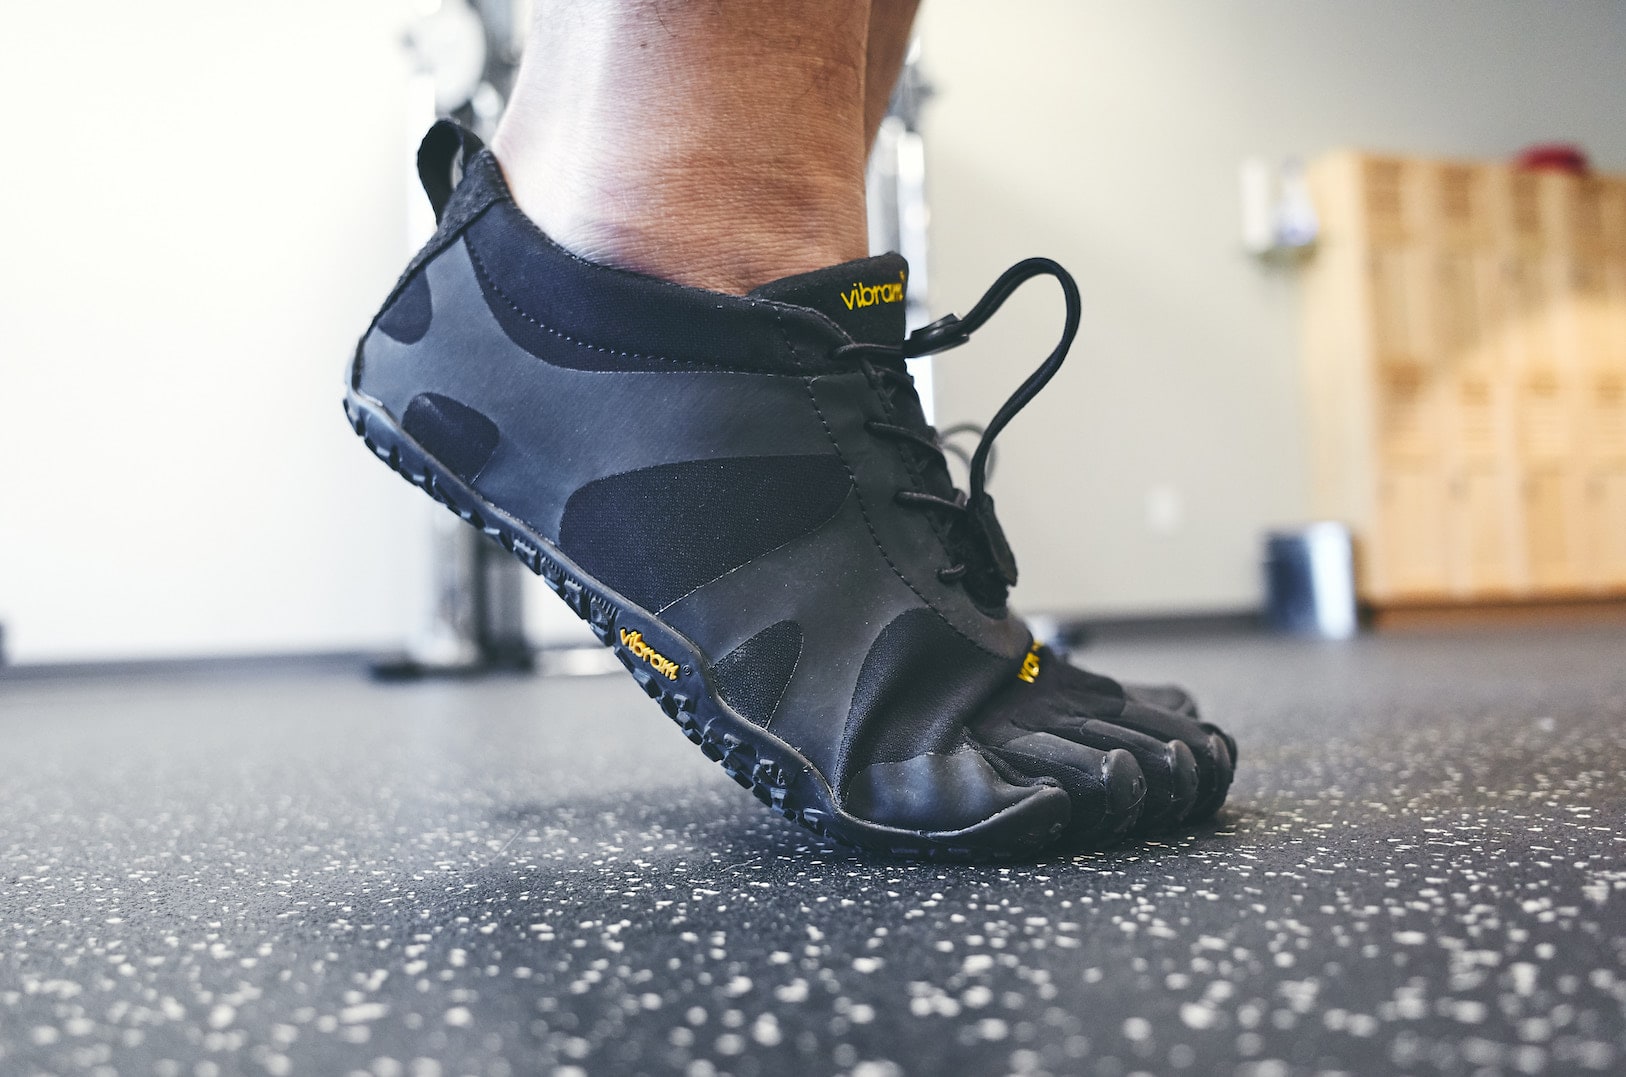 V-Alpha Vibram FiveFingers Review - Birthday Shoes - Toe Shoes, Barefoot or  Minimalist Shoes, and Vibram FiveFingers Reviews, News, Forums